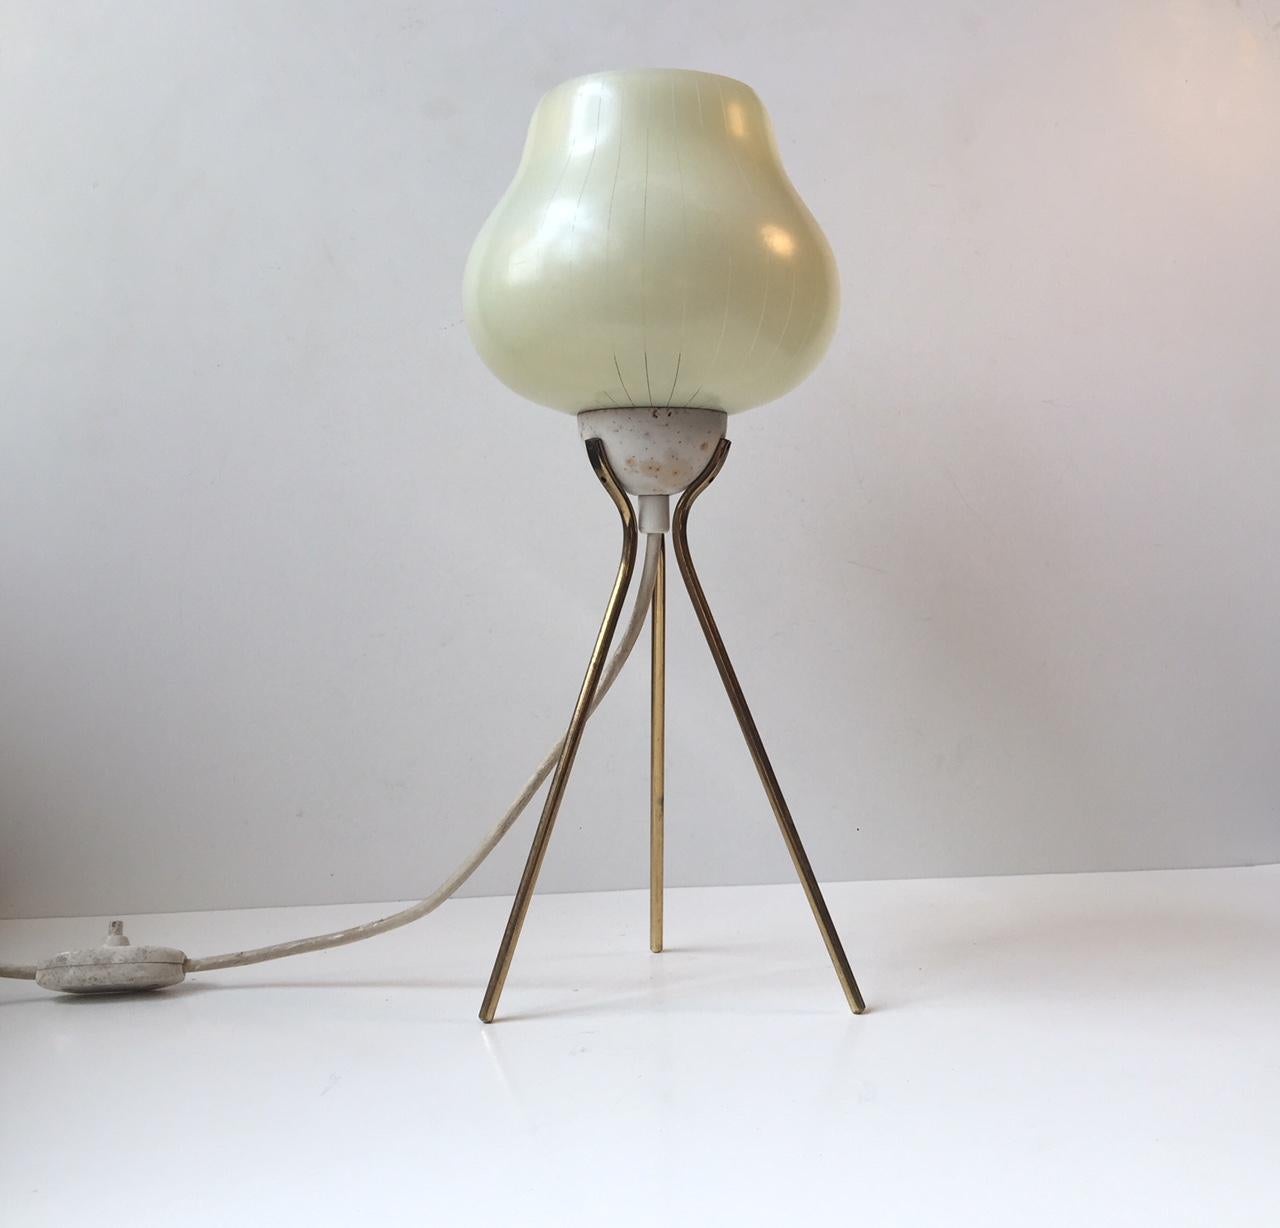 Elegant tri-stand table or desk lamp with rounded of brass legs and pin-striped glass shade. It was manufactured in Italy during the late 1950s or early 1960s in a style reminiscent of T. H. Robsjohn-Gibbings.